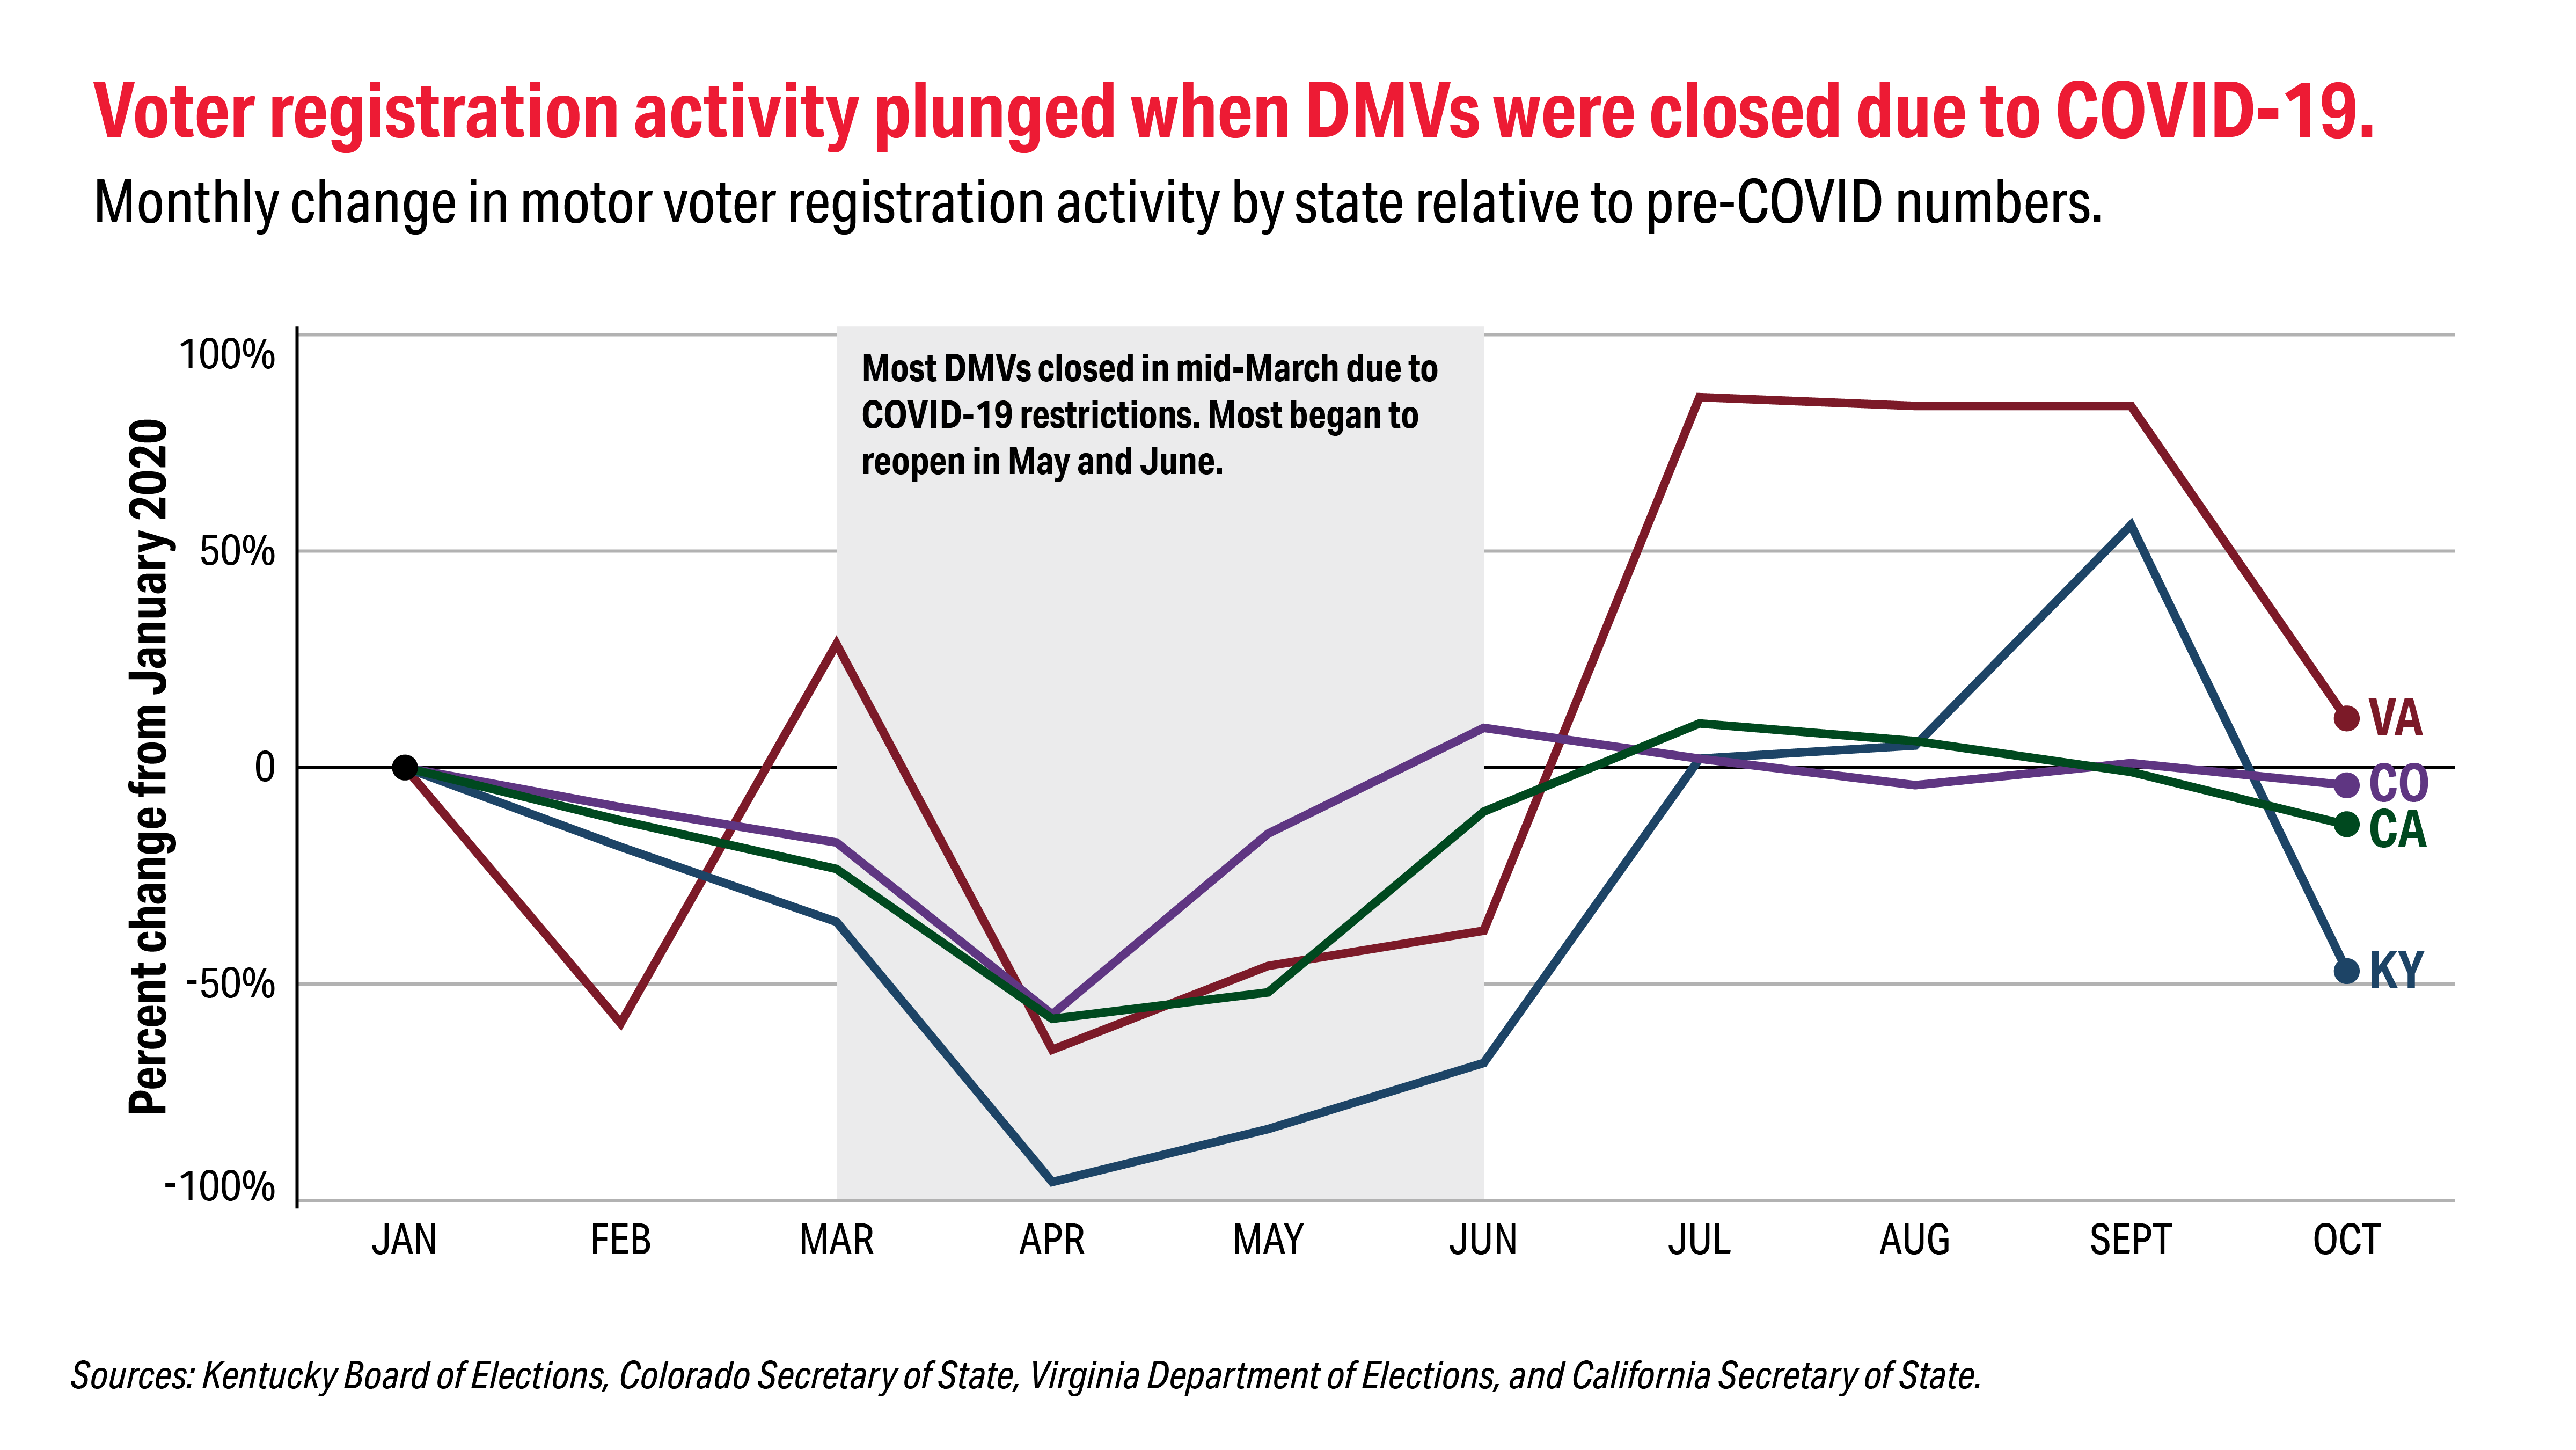 A line graph demonstrating that new voter registrations decreased when COVID-19 closures hit DMVs.